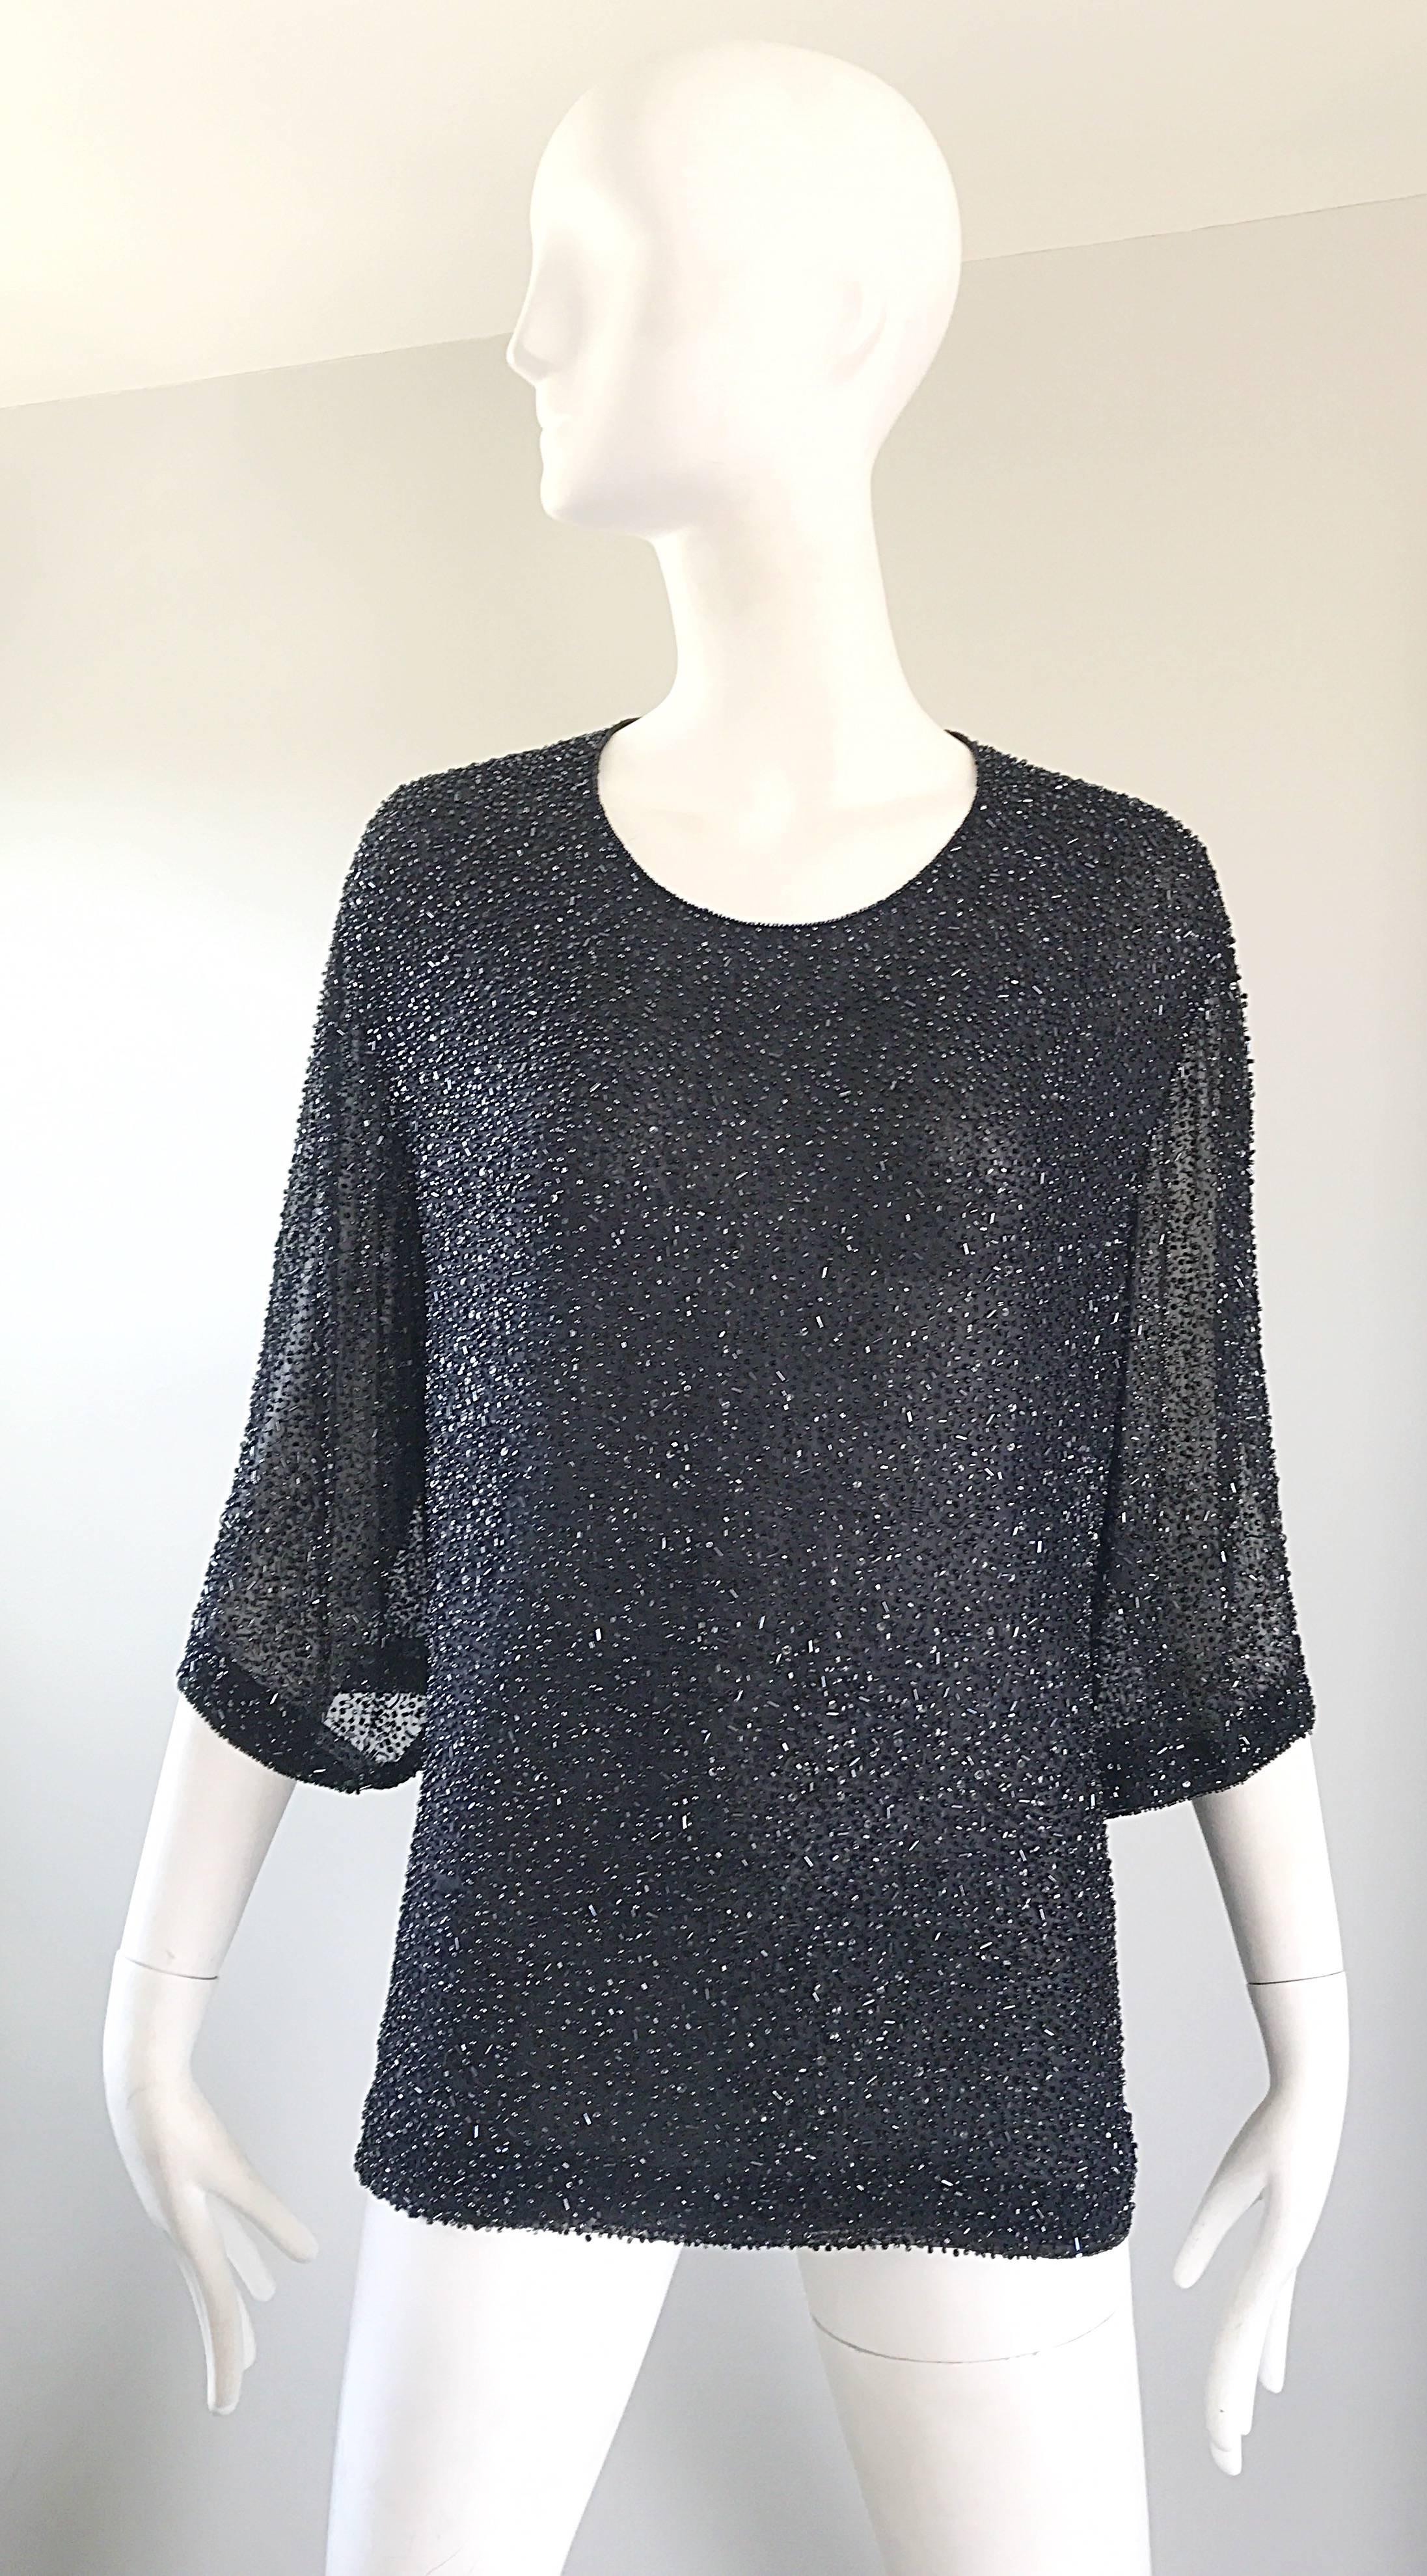 Fantastic plus size vintage BILL BLASS for SAKS 5th Ave. black silk chiffon beaded blouse! Features thousands of hand-sewn seed beads throughout the entire top. Silk covered black buttons up the back. Semi sheer 3/4 sleeves. Great belted or alone.